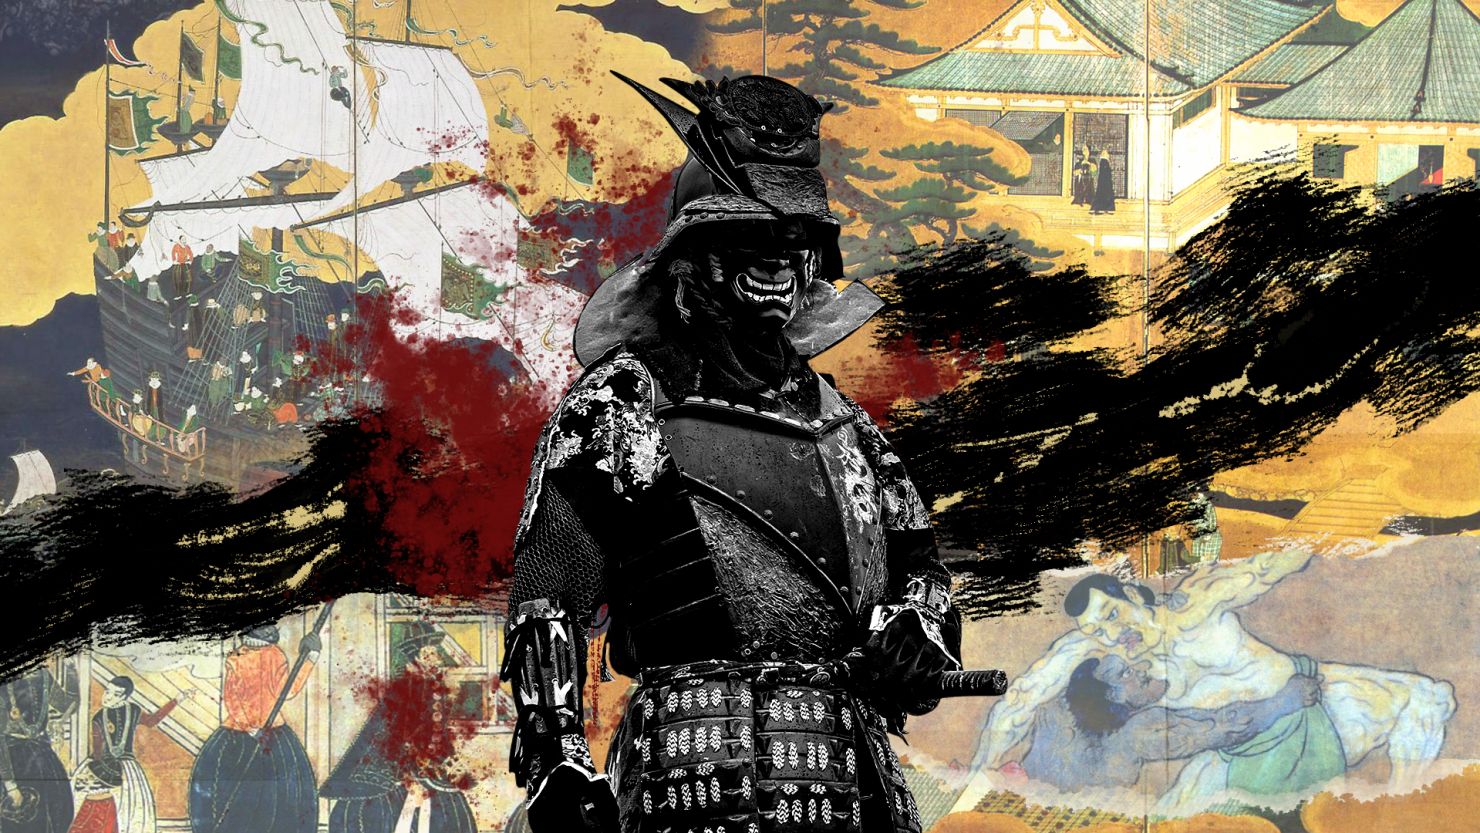 African samurai: The legacy of a black warrior in feudal Japan